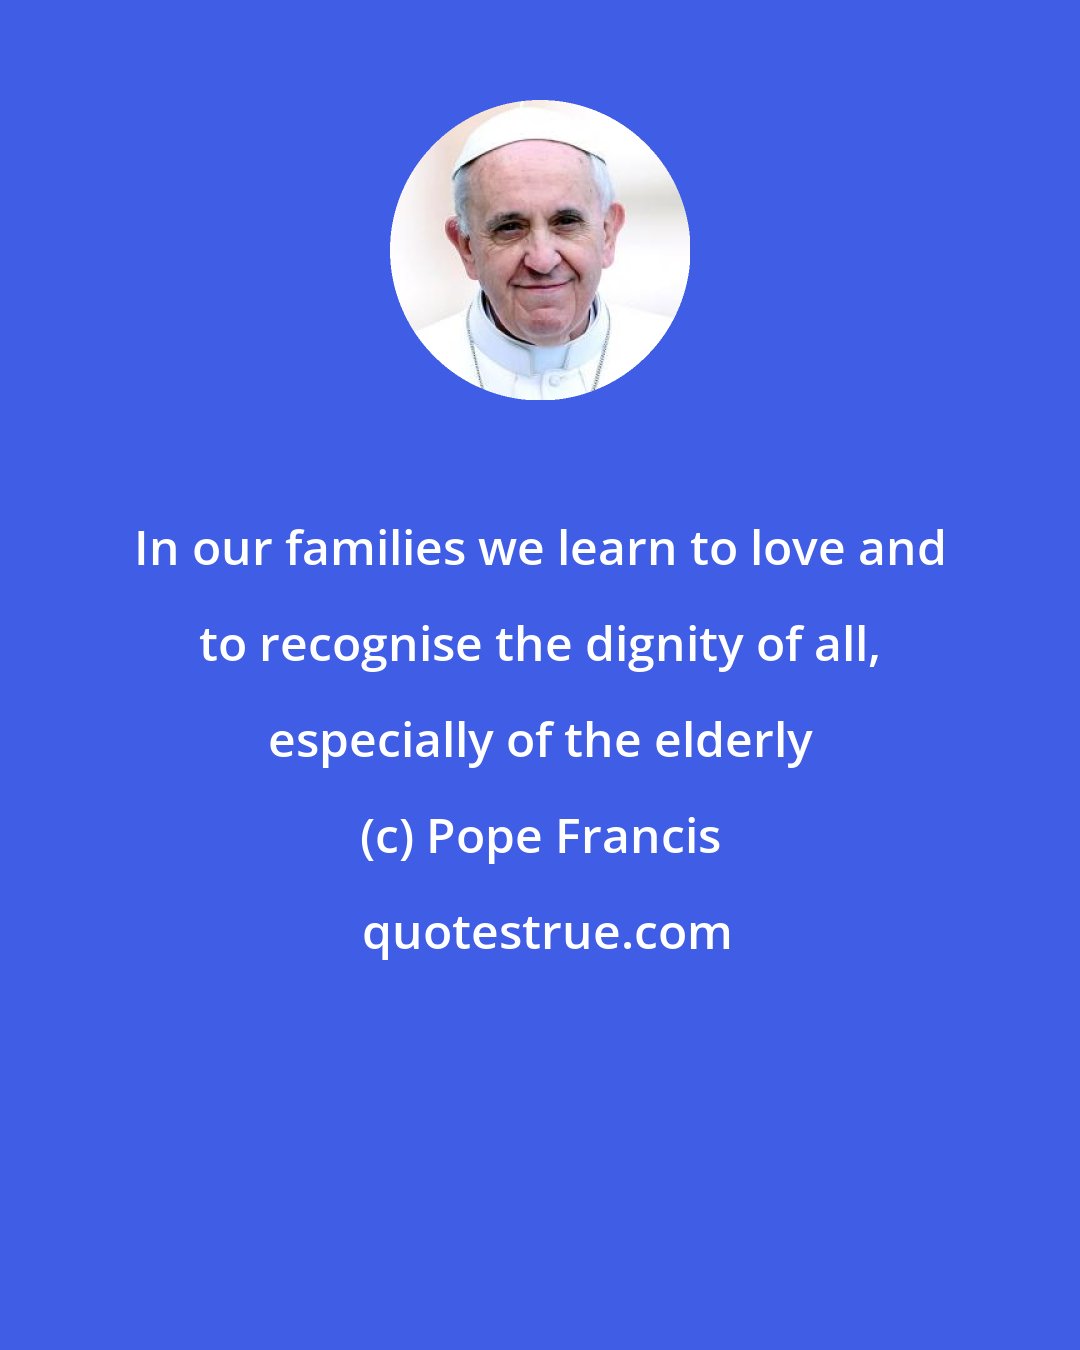 Pope Francis: In our families we learn to love and to recognise the dignity of all, especially of the elderly